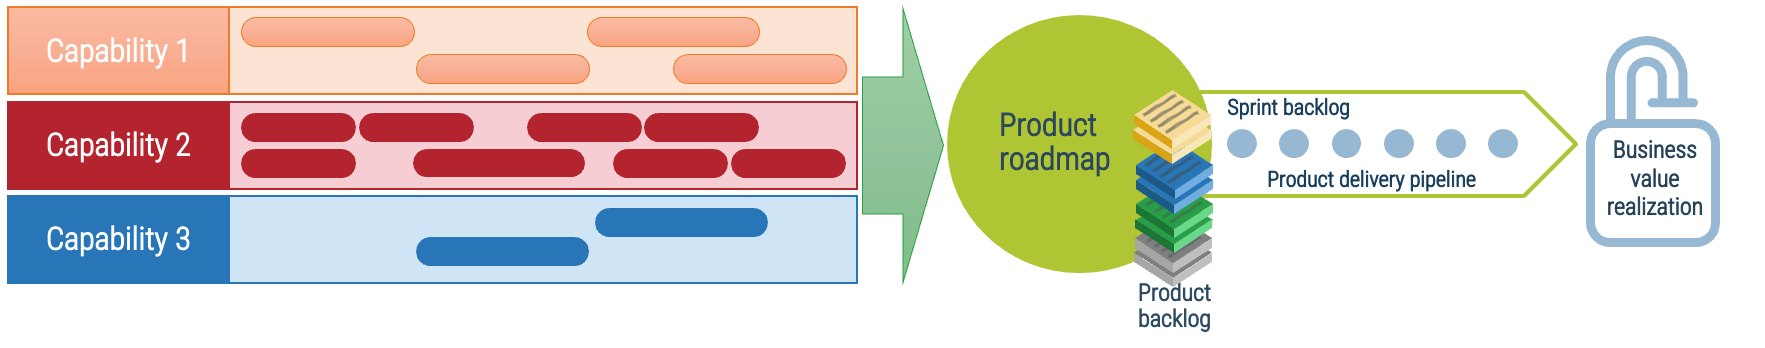 Every roadmap item should have an expected realized value once it is implemented. The associate KPIs or OKRs determine if our goal was met. Any gap in value feedback back into the roadmap and backlog refinement.</p data-verified=